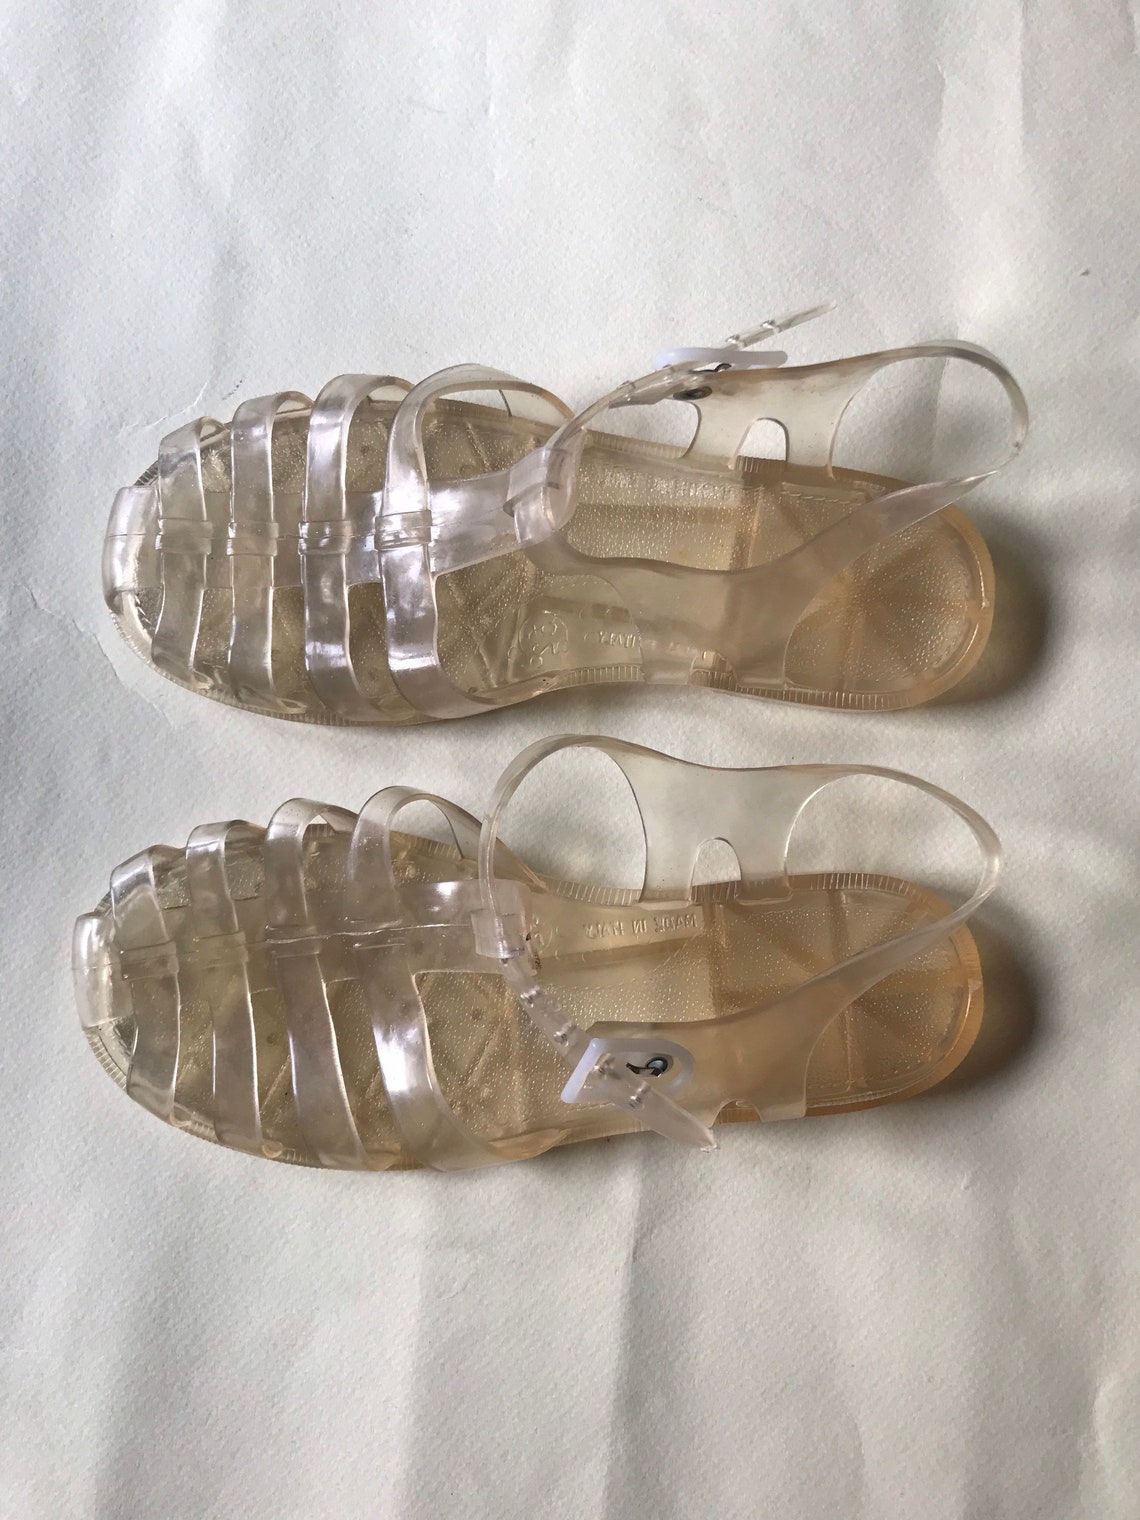 Clear Jelly Shoes for Kids With Buckle Closure 90s - Etsy